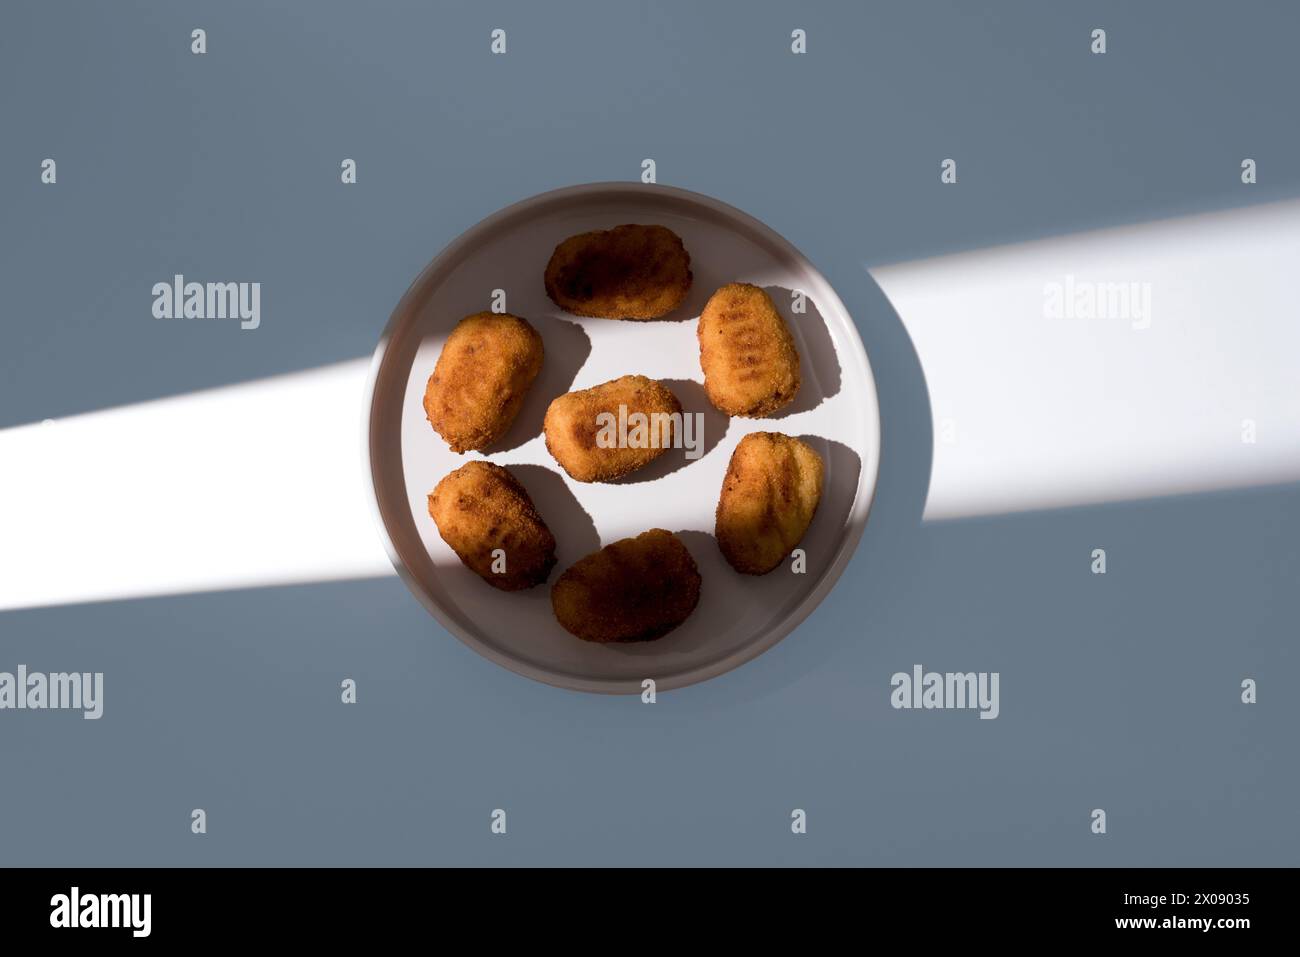 A ceramic plate filled with Spanish appetizer croquettes is partially illuminated by sunlight, creating a dynamic contrast between light and shadow on Stock Photo